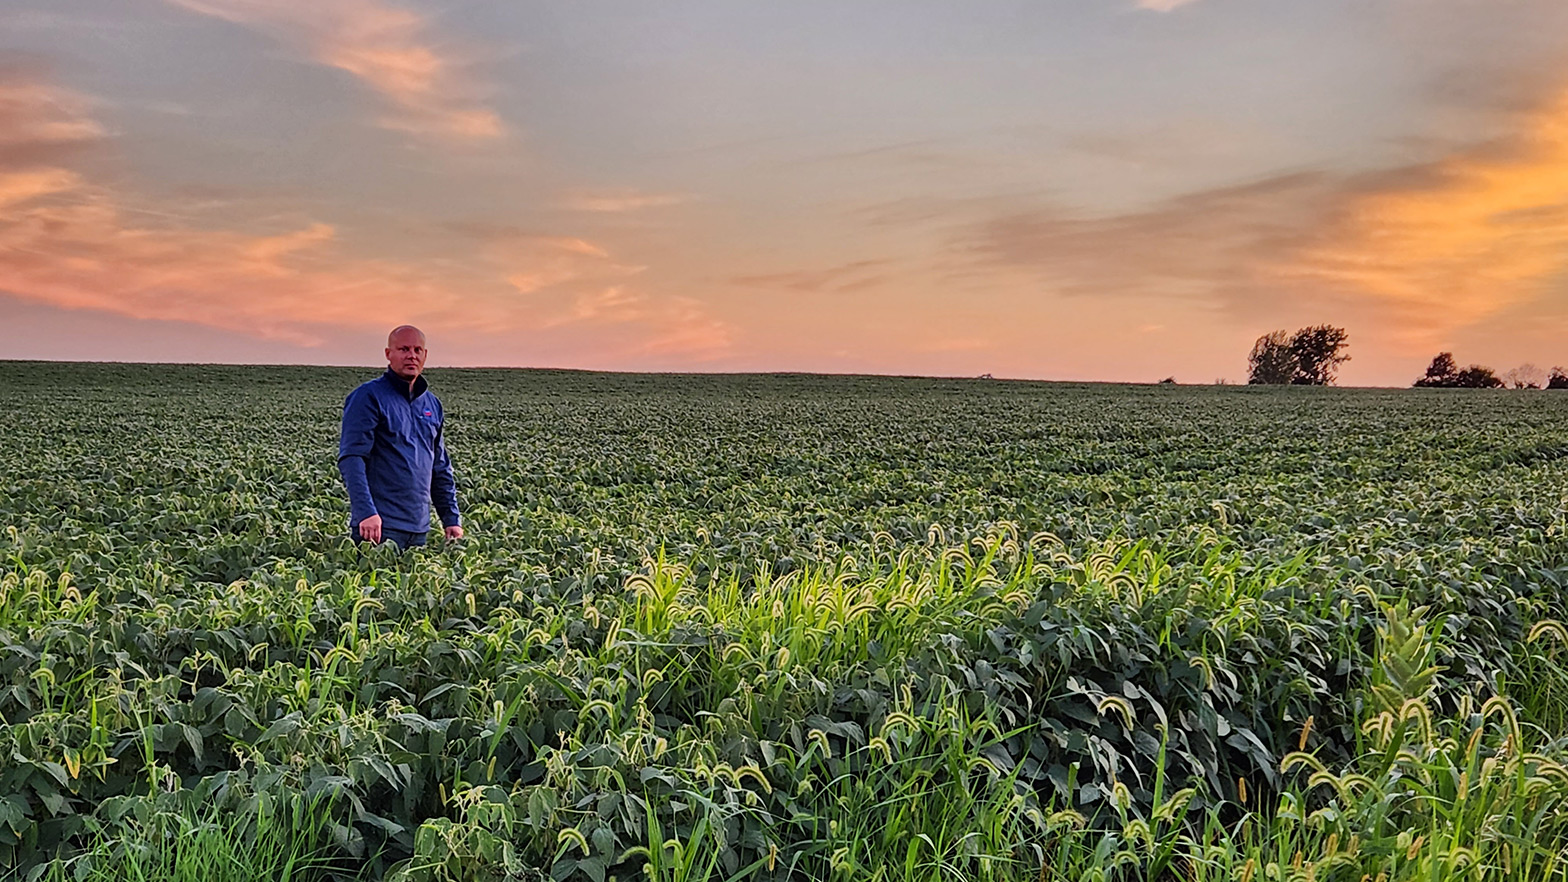 Nees, pictured in a soybean field, says the industry is seeing renewable fuels production ramp up with demand.